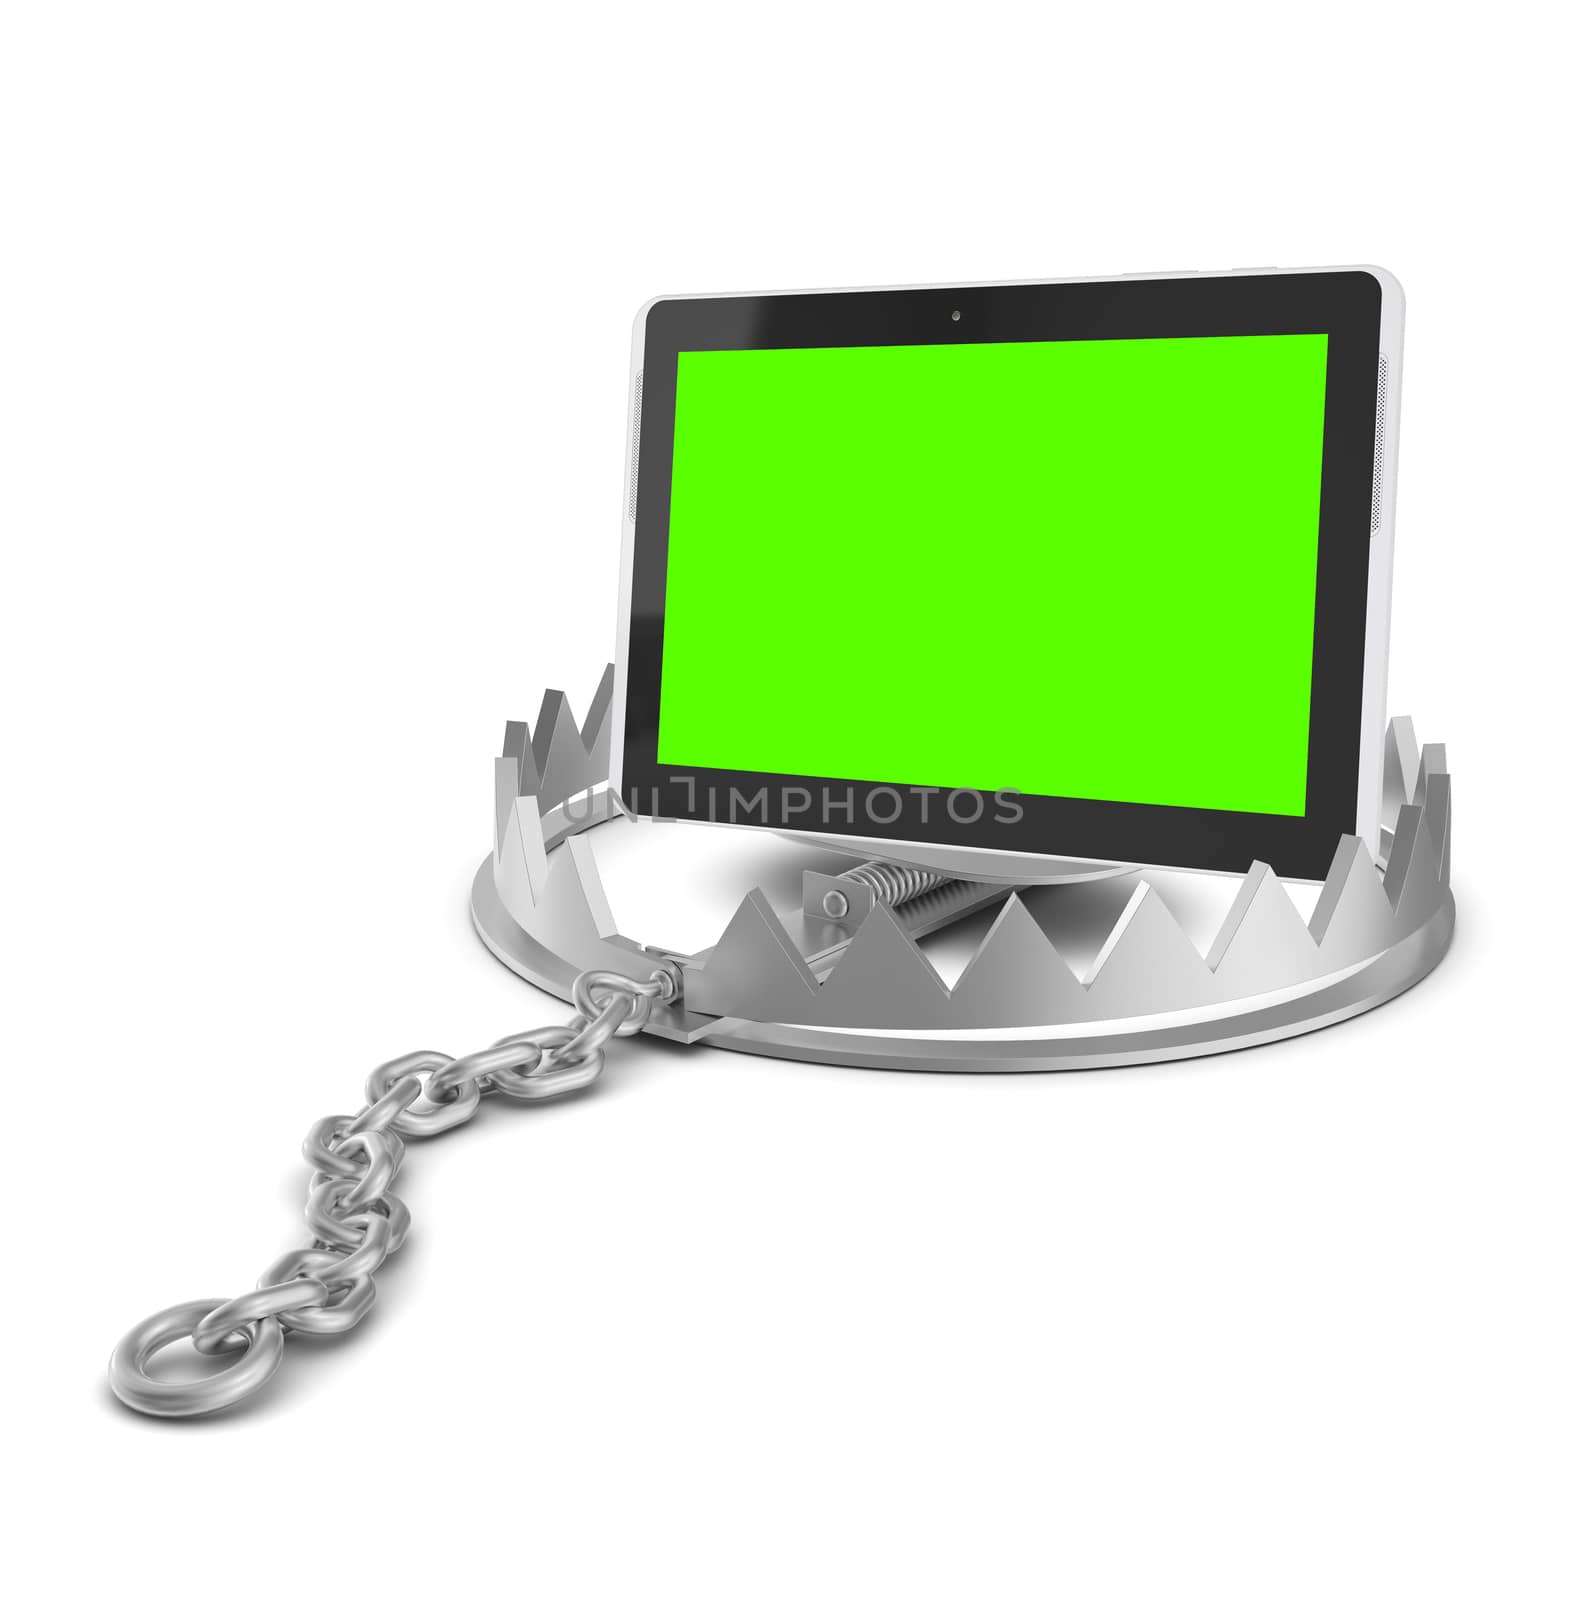 Tablet in bear trap on isolated white background, close-up view